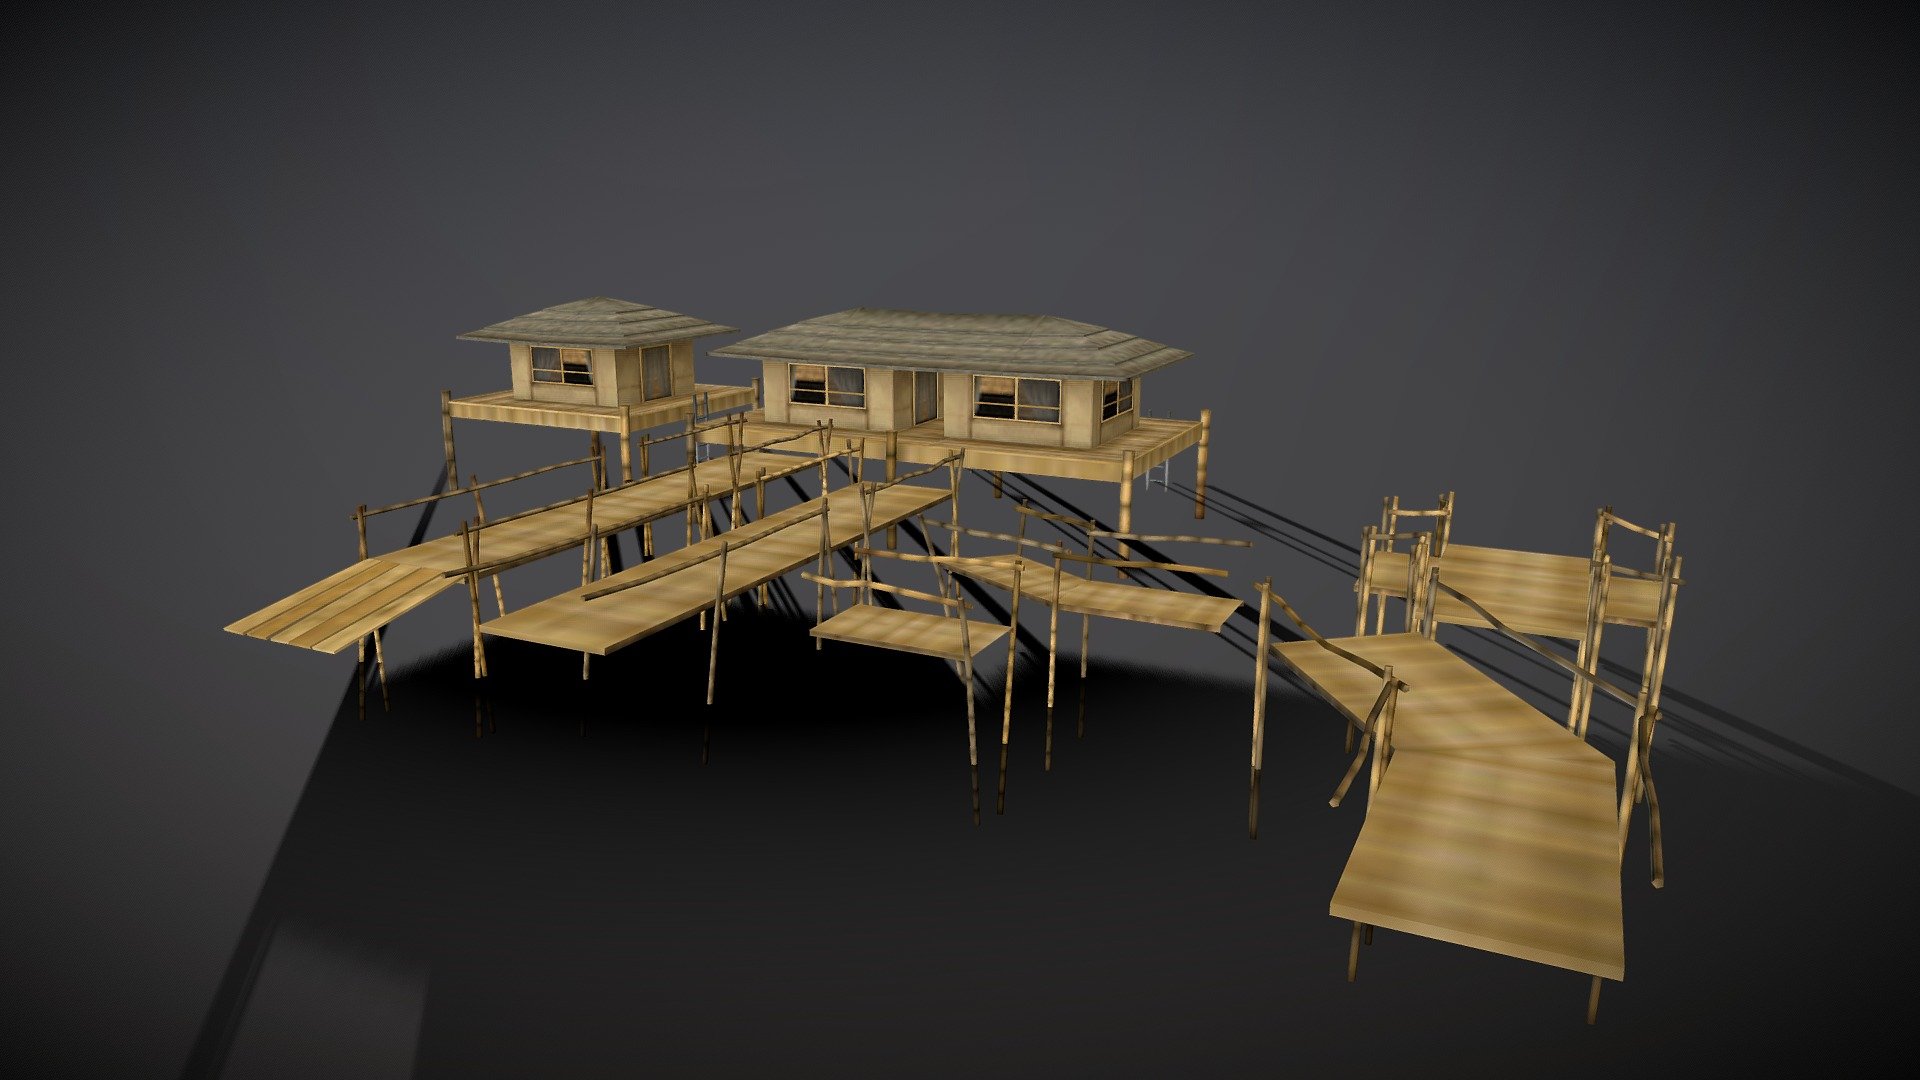 Bambu Water hotel

diffuse 
spec
normal 
game ready 
lowpoly mesh 
textures Materials 
Game Asset Unity &amp; Unreal - Bamboo Village Beach Resort - Buy Royalty Free 3D model by tosbin 3d model